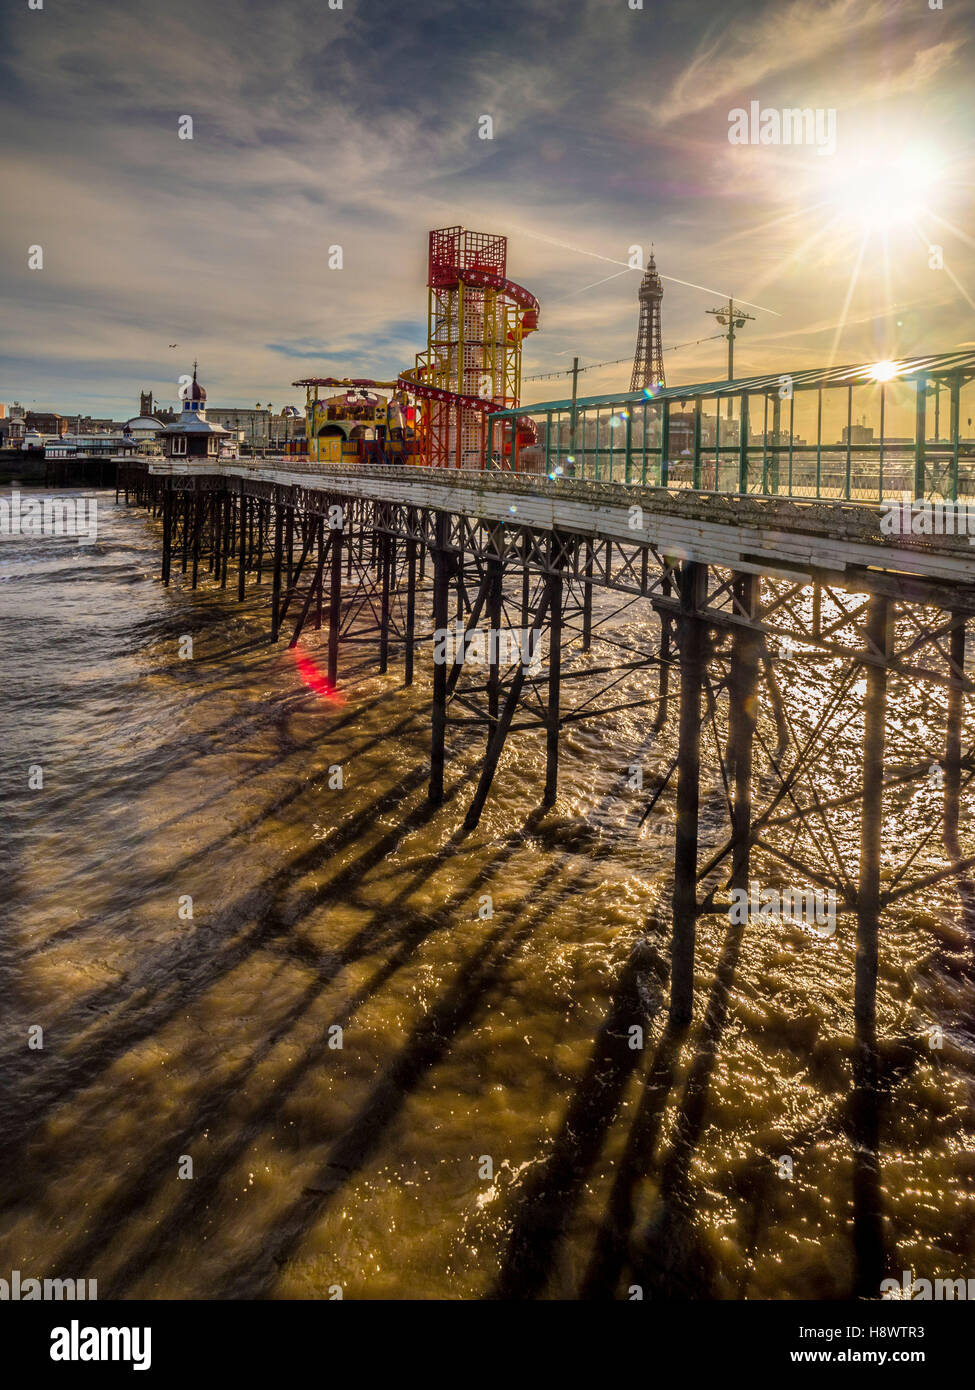 Helter Skelter on North Pier with Tower in distance, Blackpool, Lancashire, UK. Stock Photo